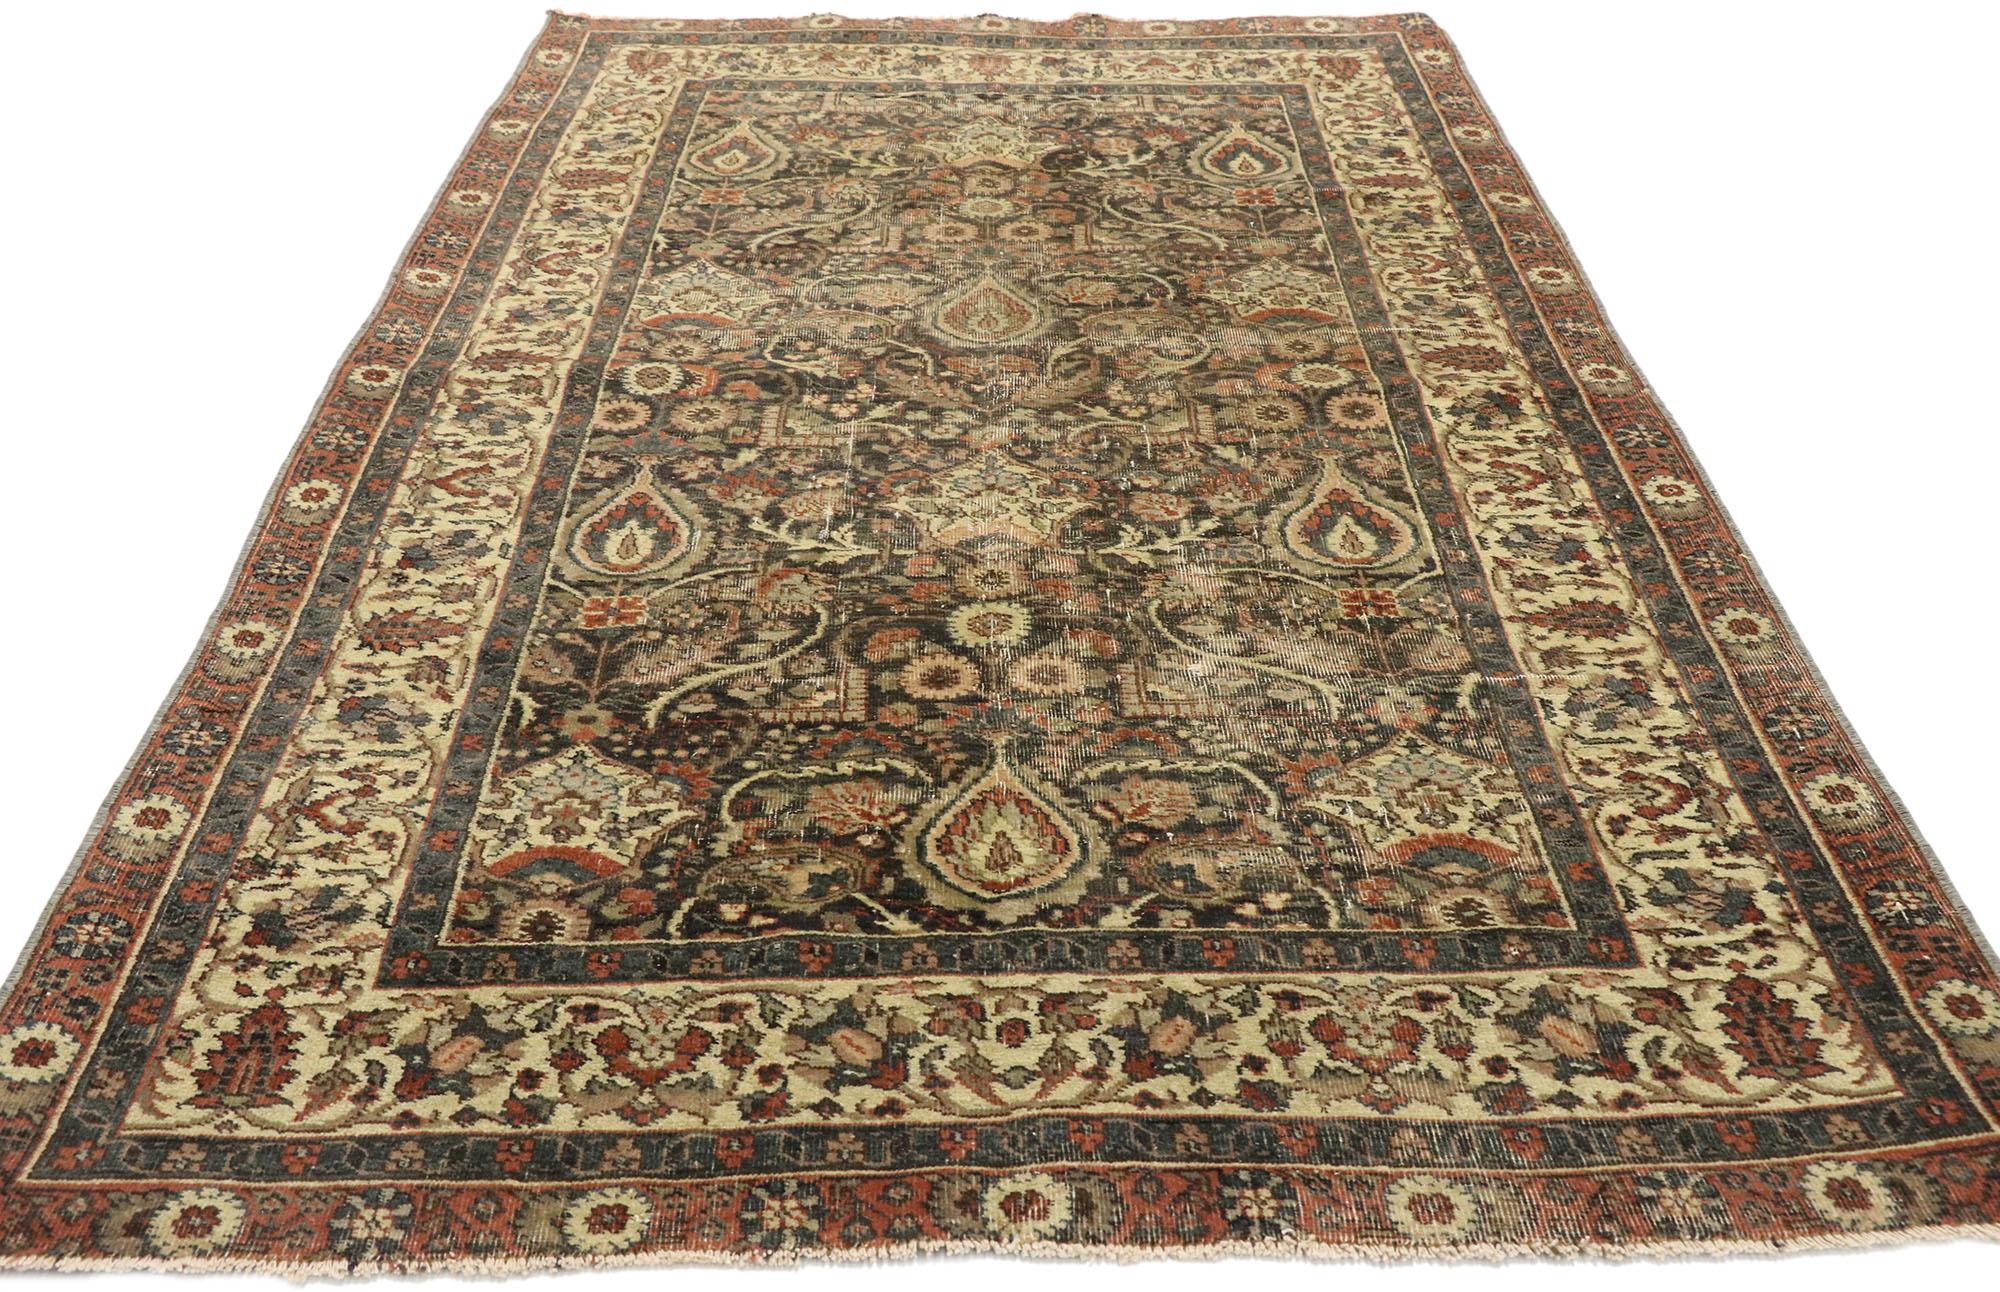 Distressed Antique Turkish Sivas Rug with Rustic Belgian Style In Distressed Condition For Sale In Dallas, TX